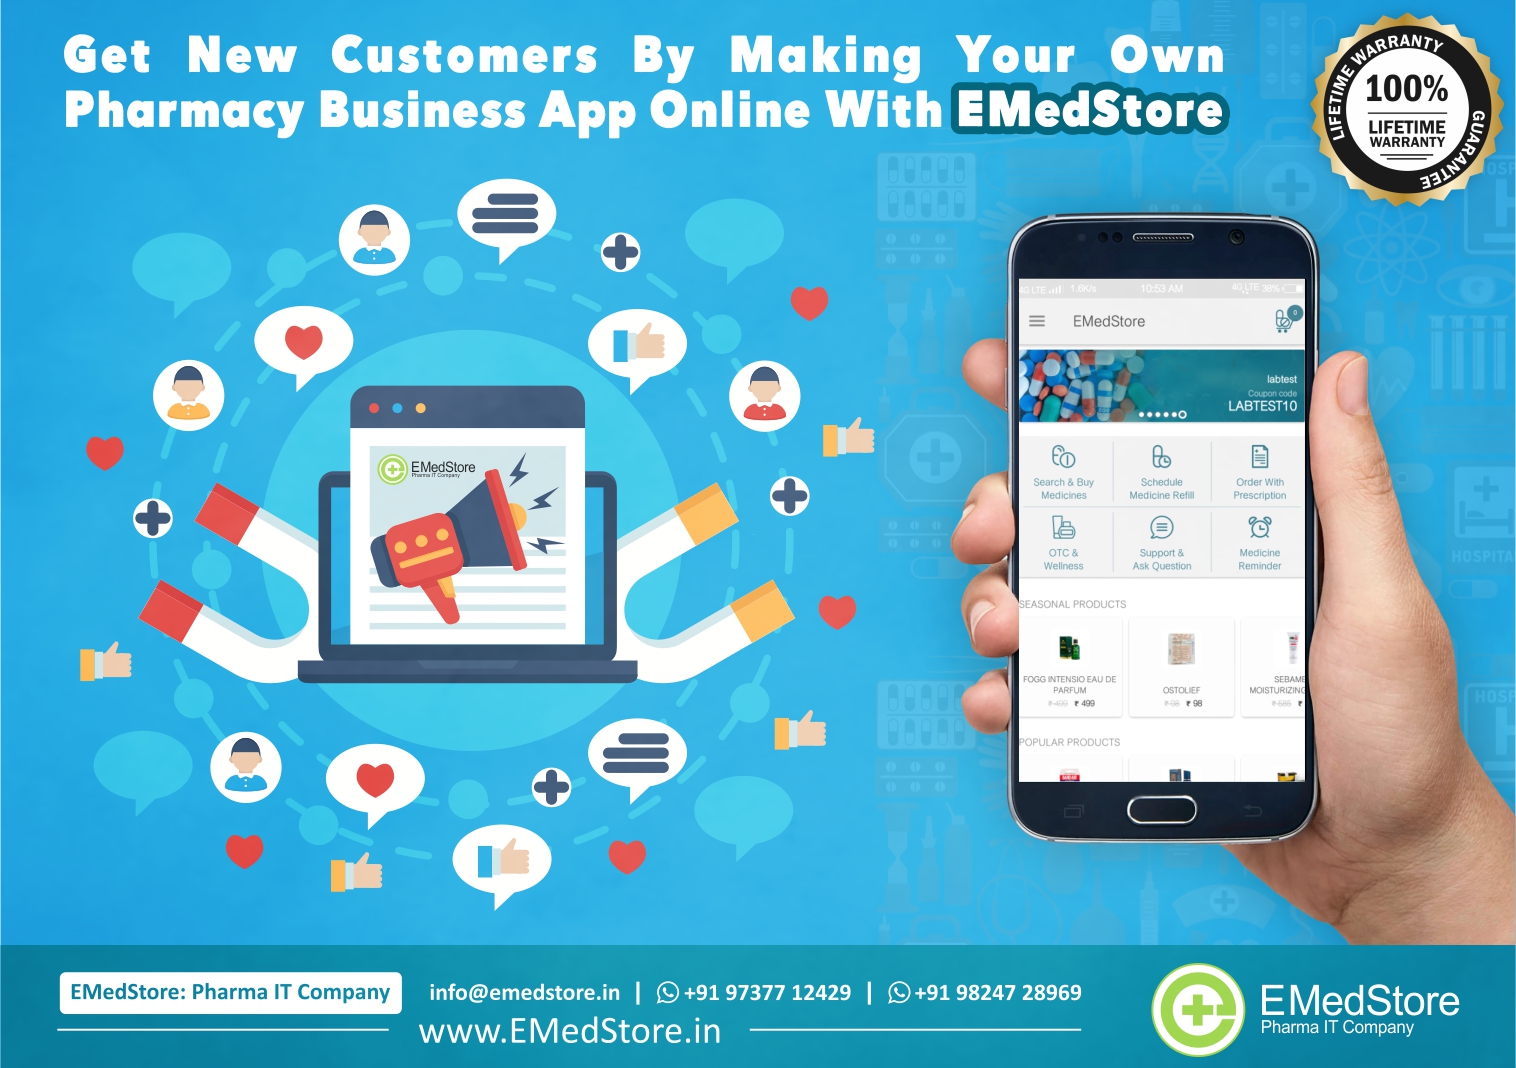 Get New Customers By Marketing Your Own Pharmacy Business App Online With EMedStore